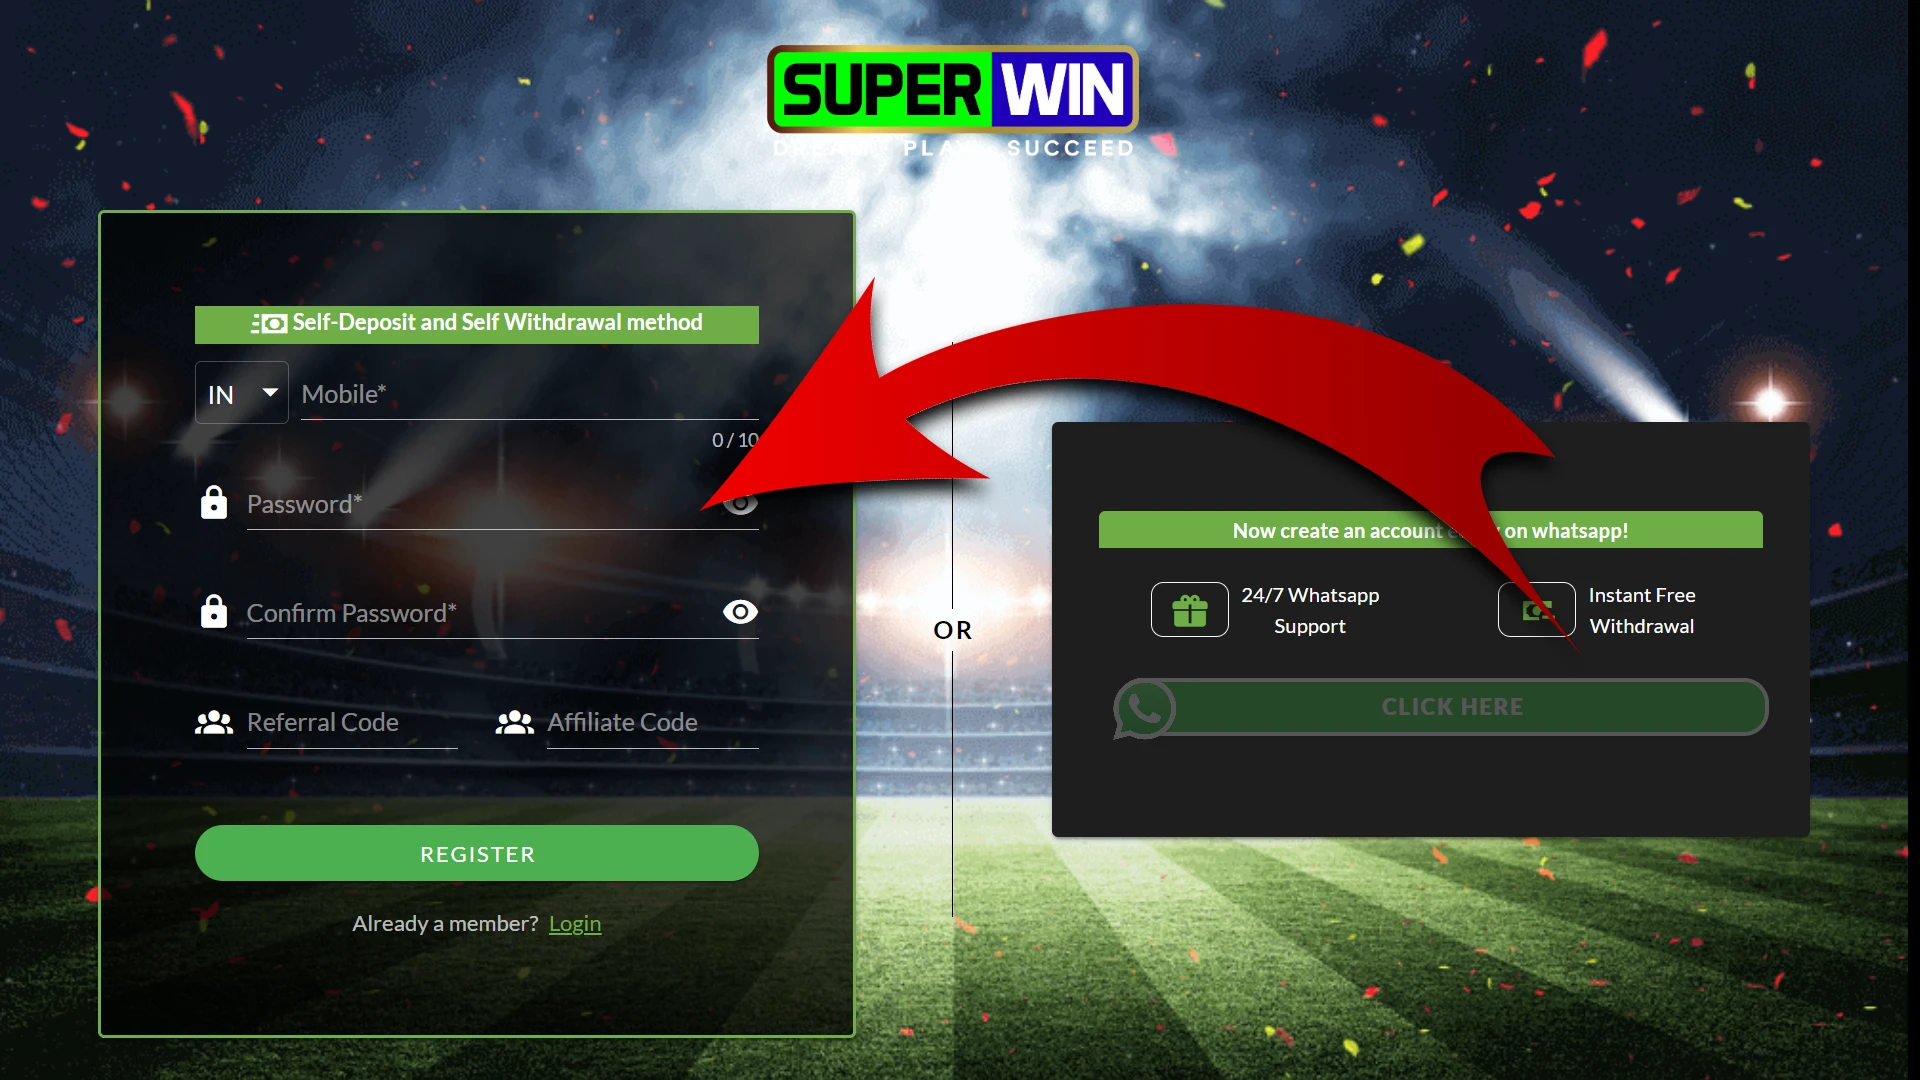 Fill in all the required information in the Superwin registration window.